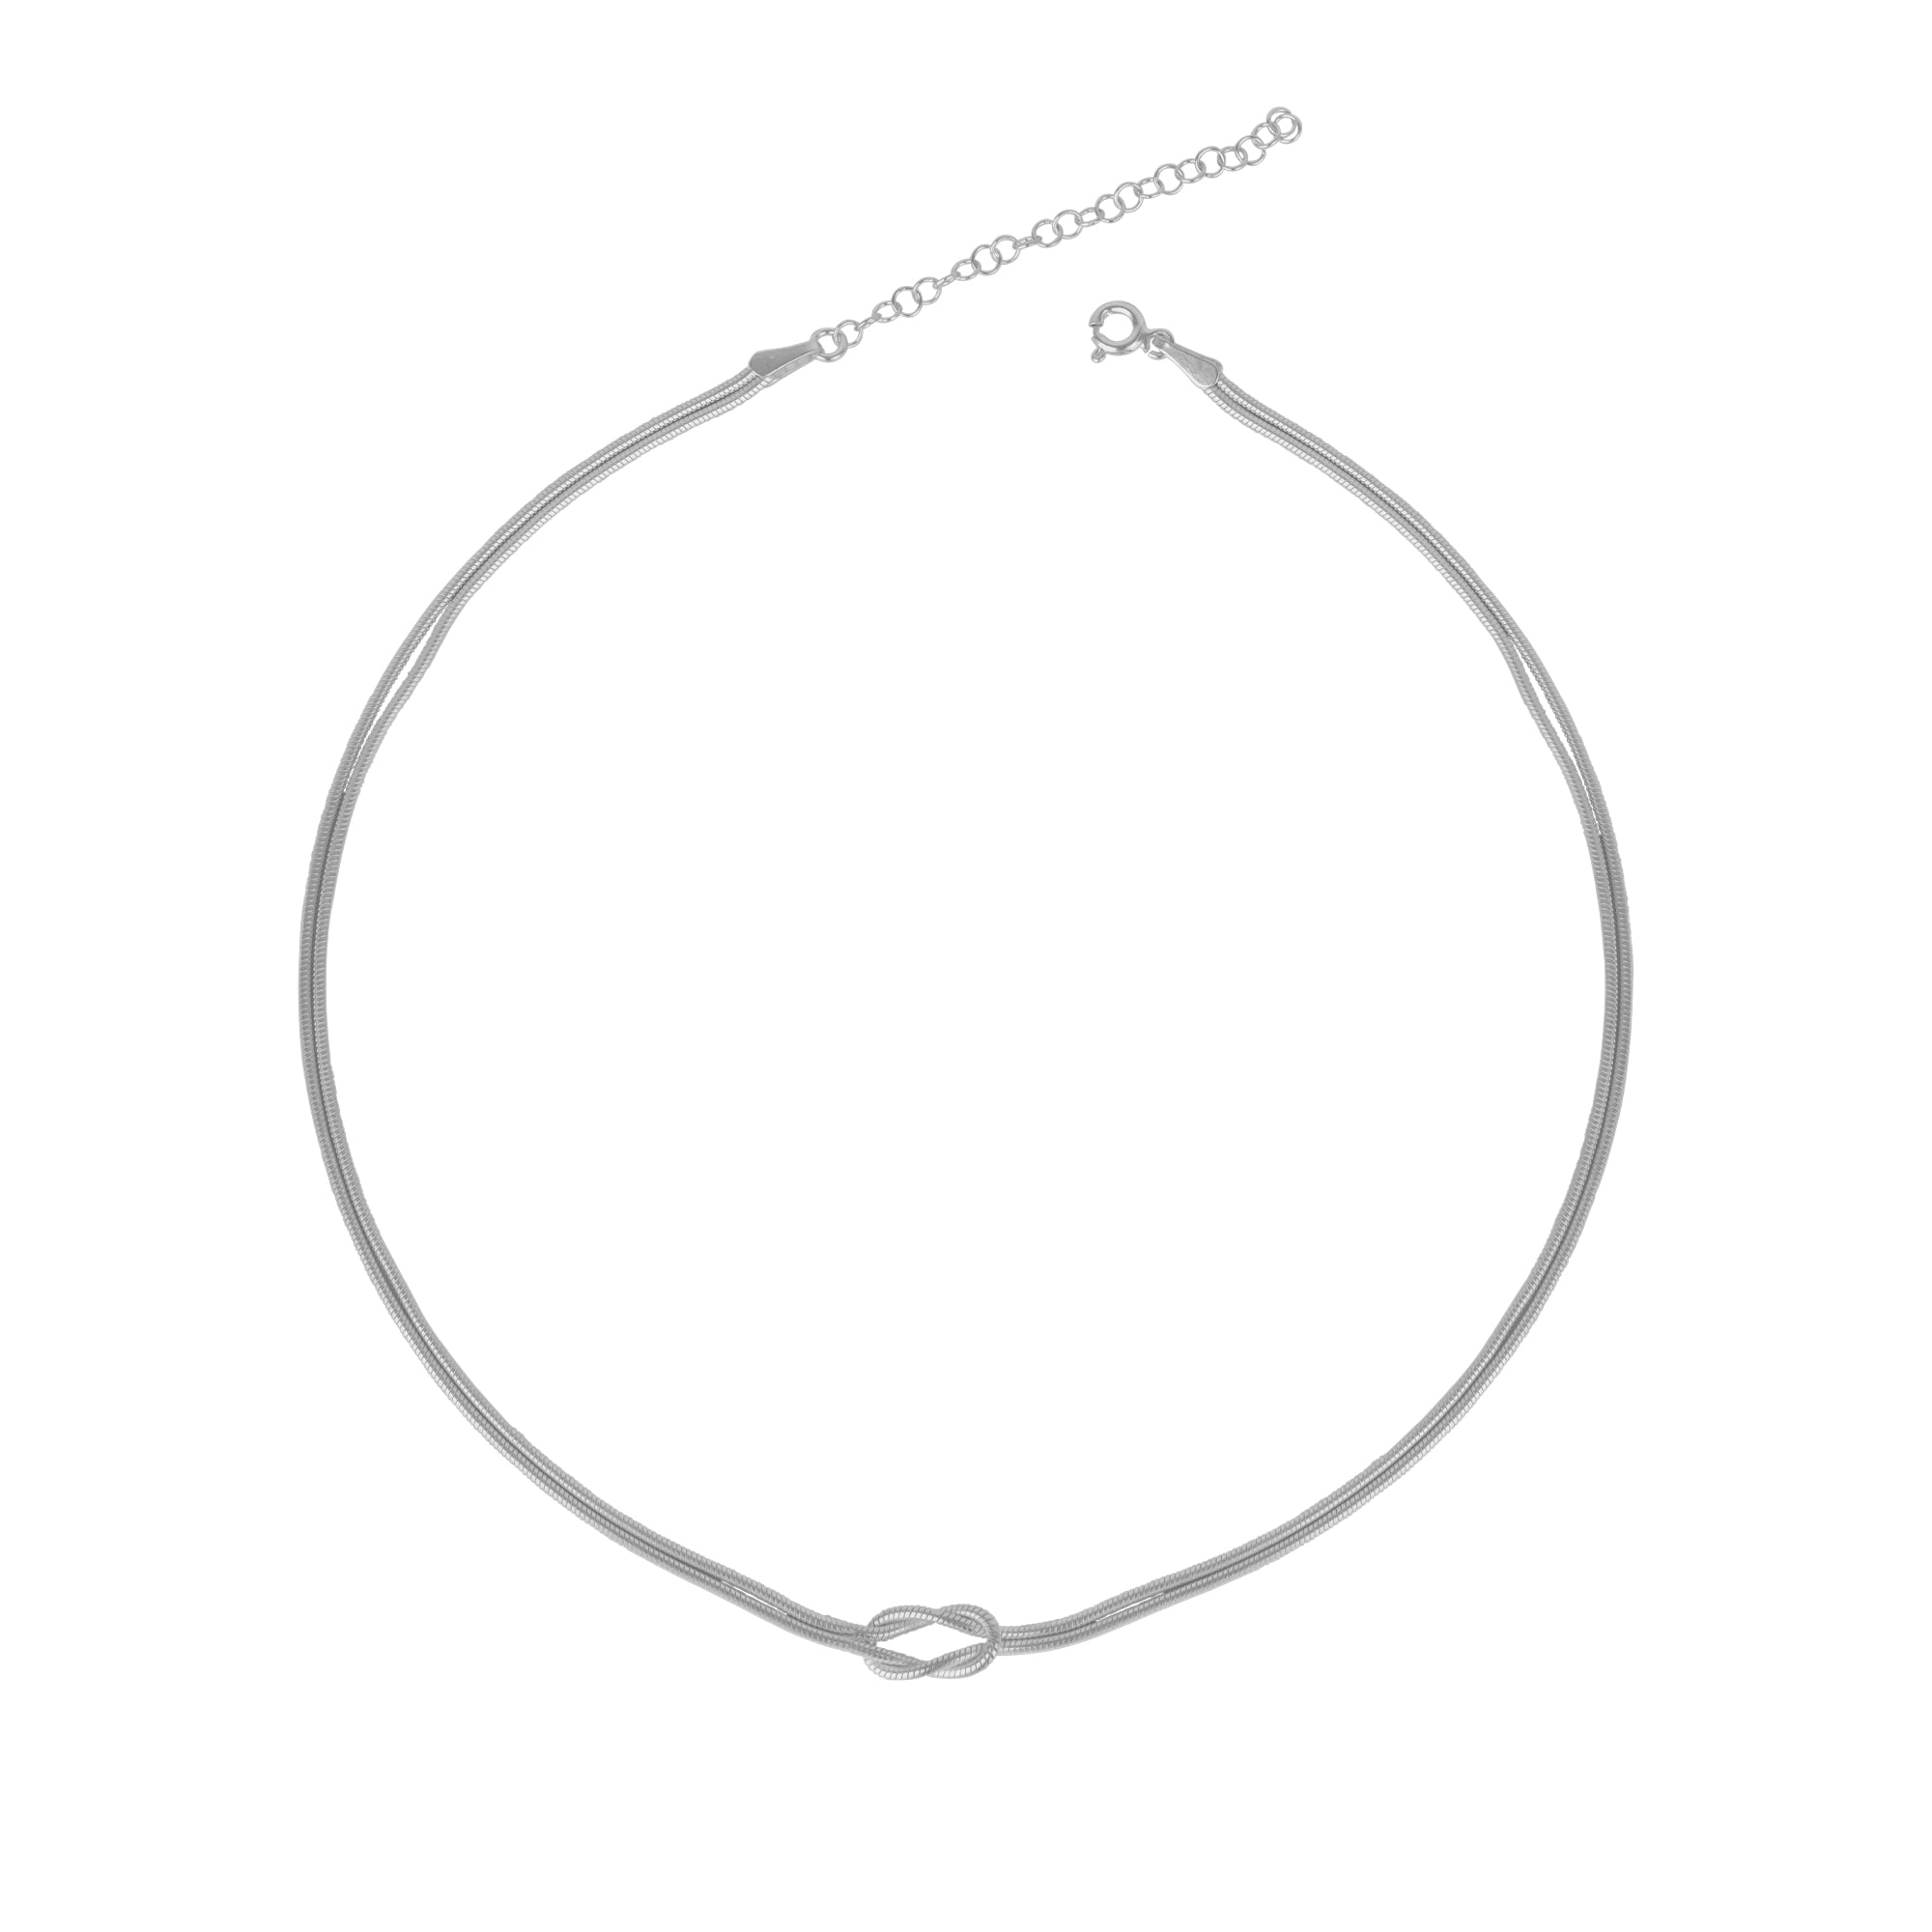 Knot Chain Choker Necklace in Sterling Silver